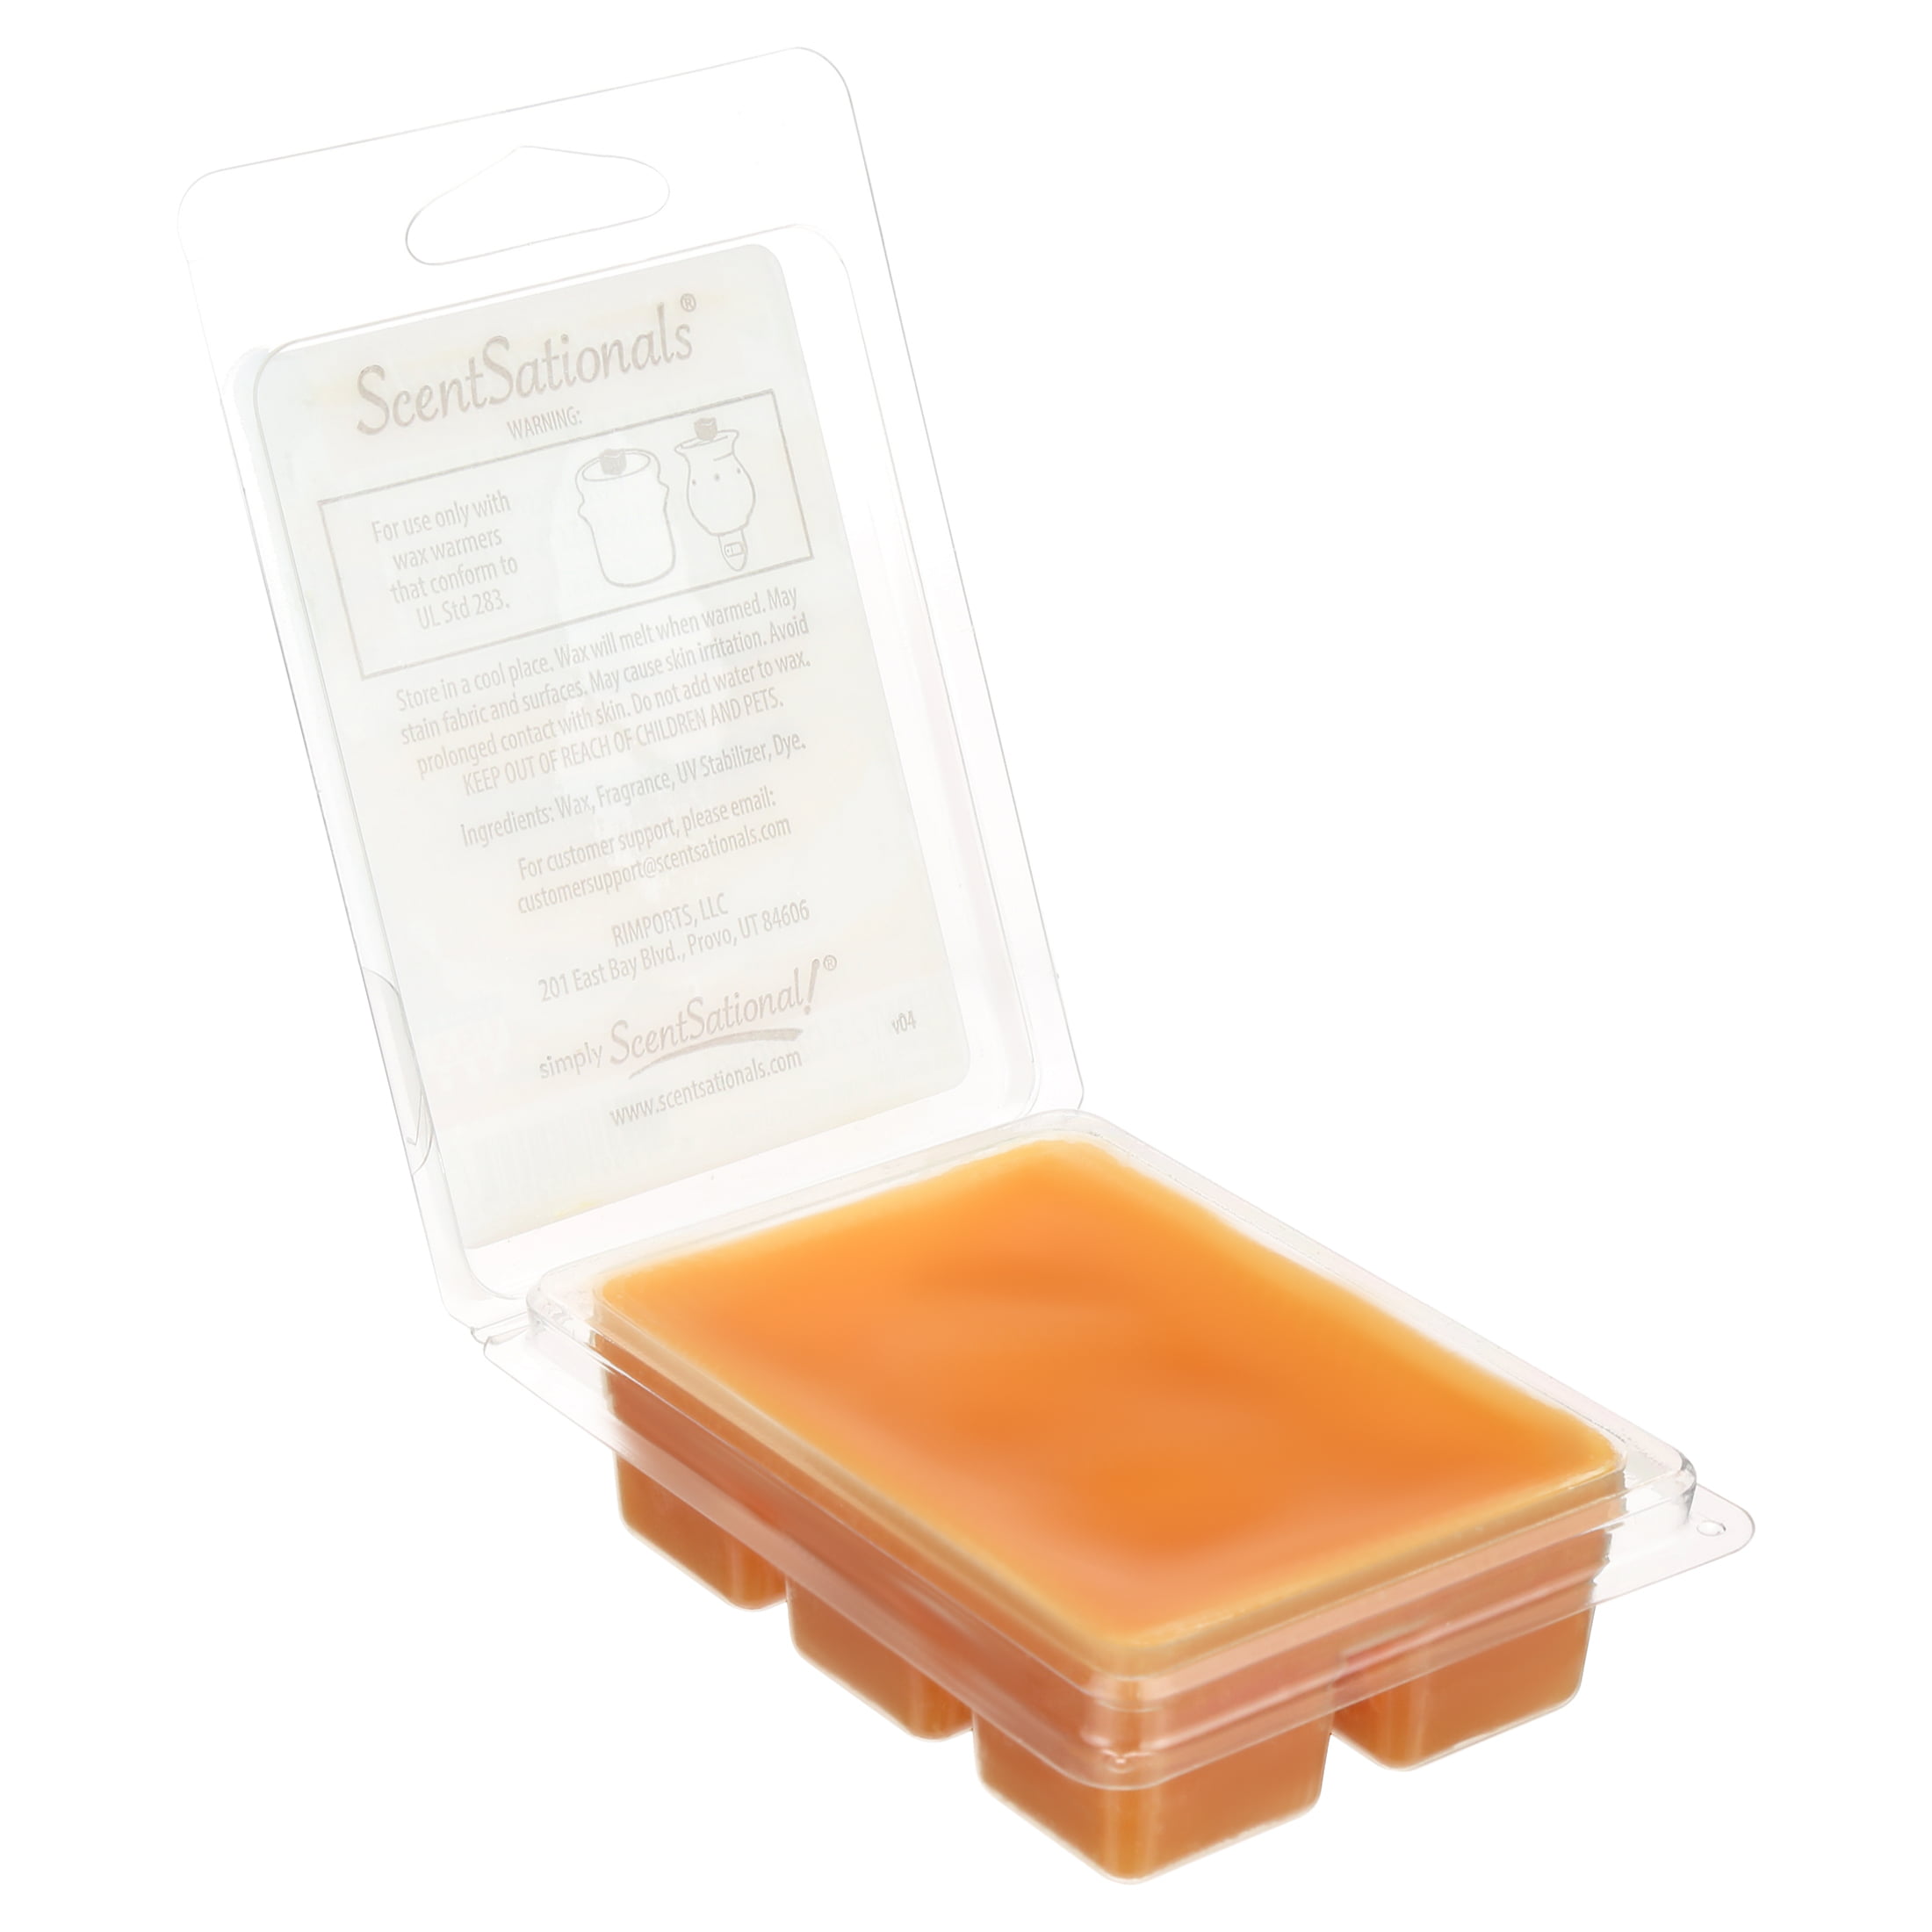 Penny Candy ScentSationals Wax Melt Review - Candlefind